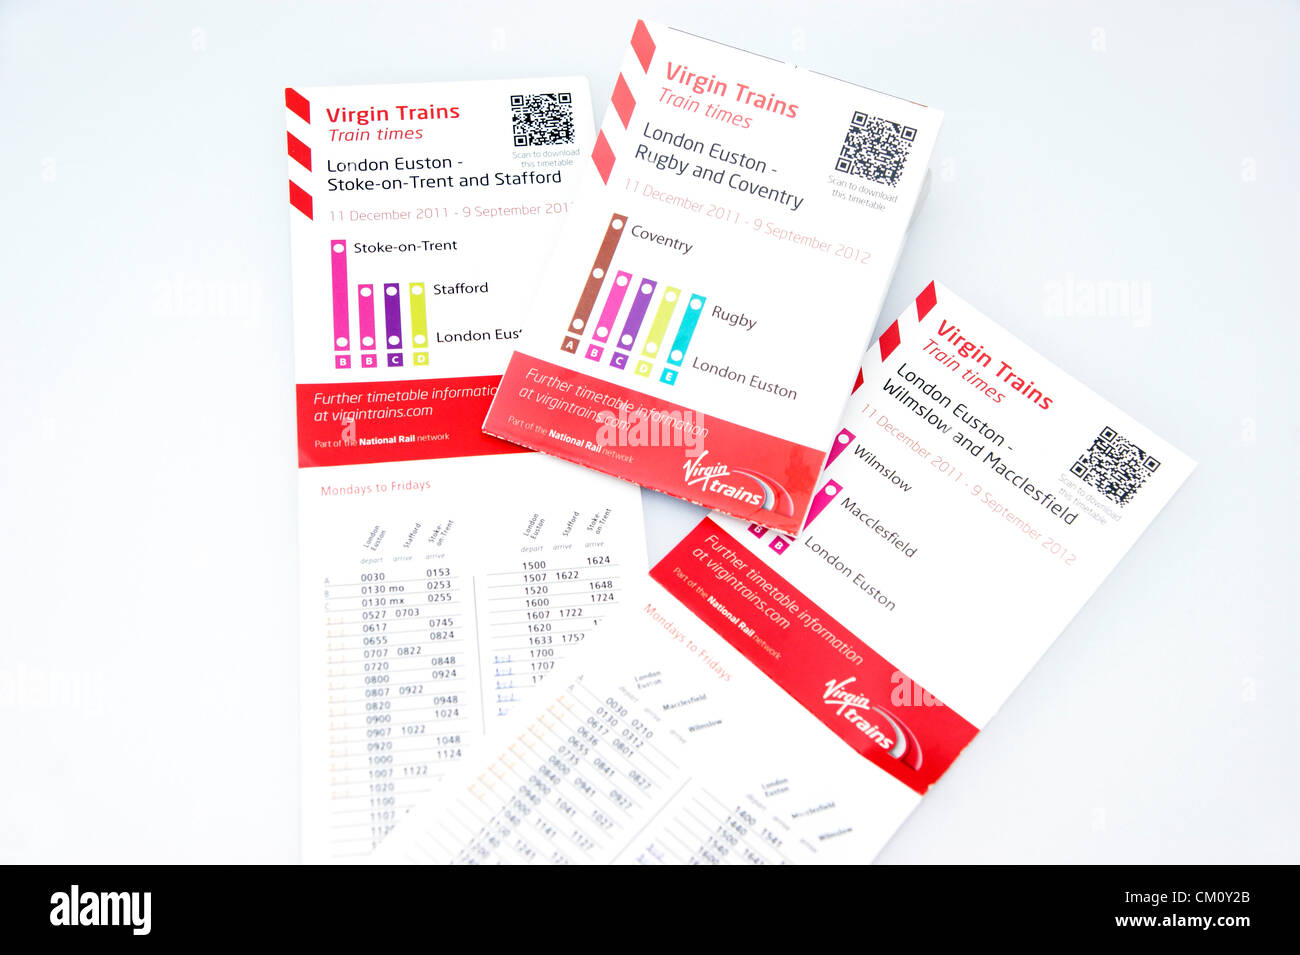 Virgin trains train timetables on a white background Stock Photo